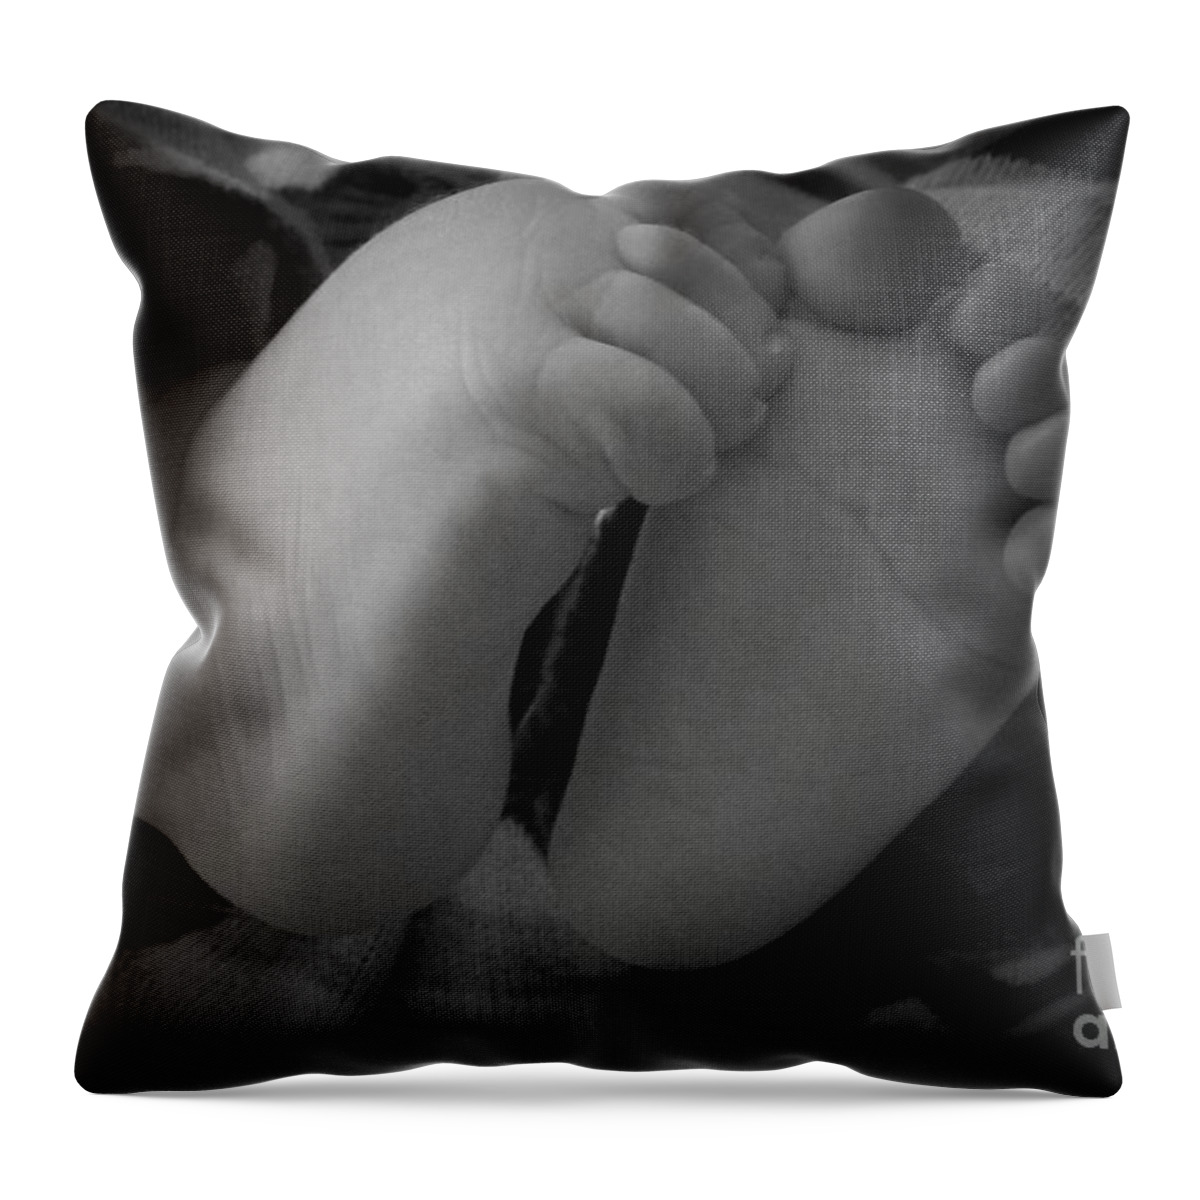 Baby Throw Pillow featuring the photograph Baby Feet by Barbara Bardzik